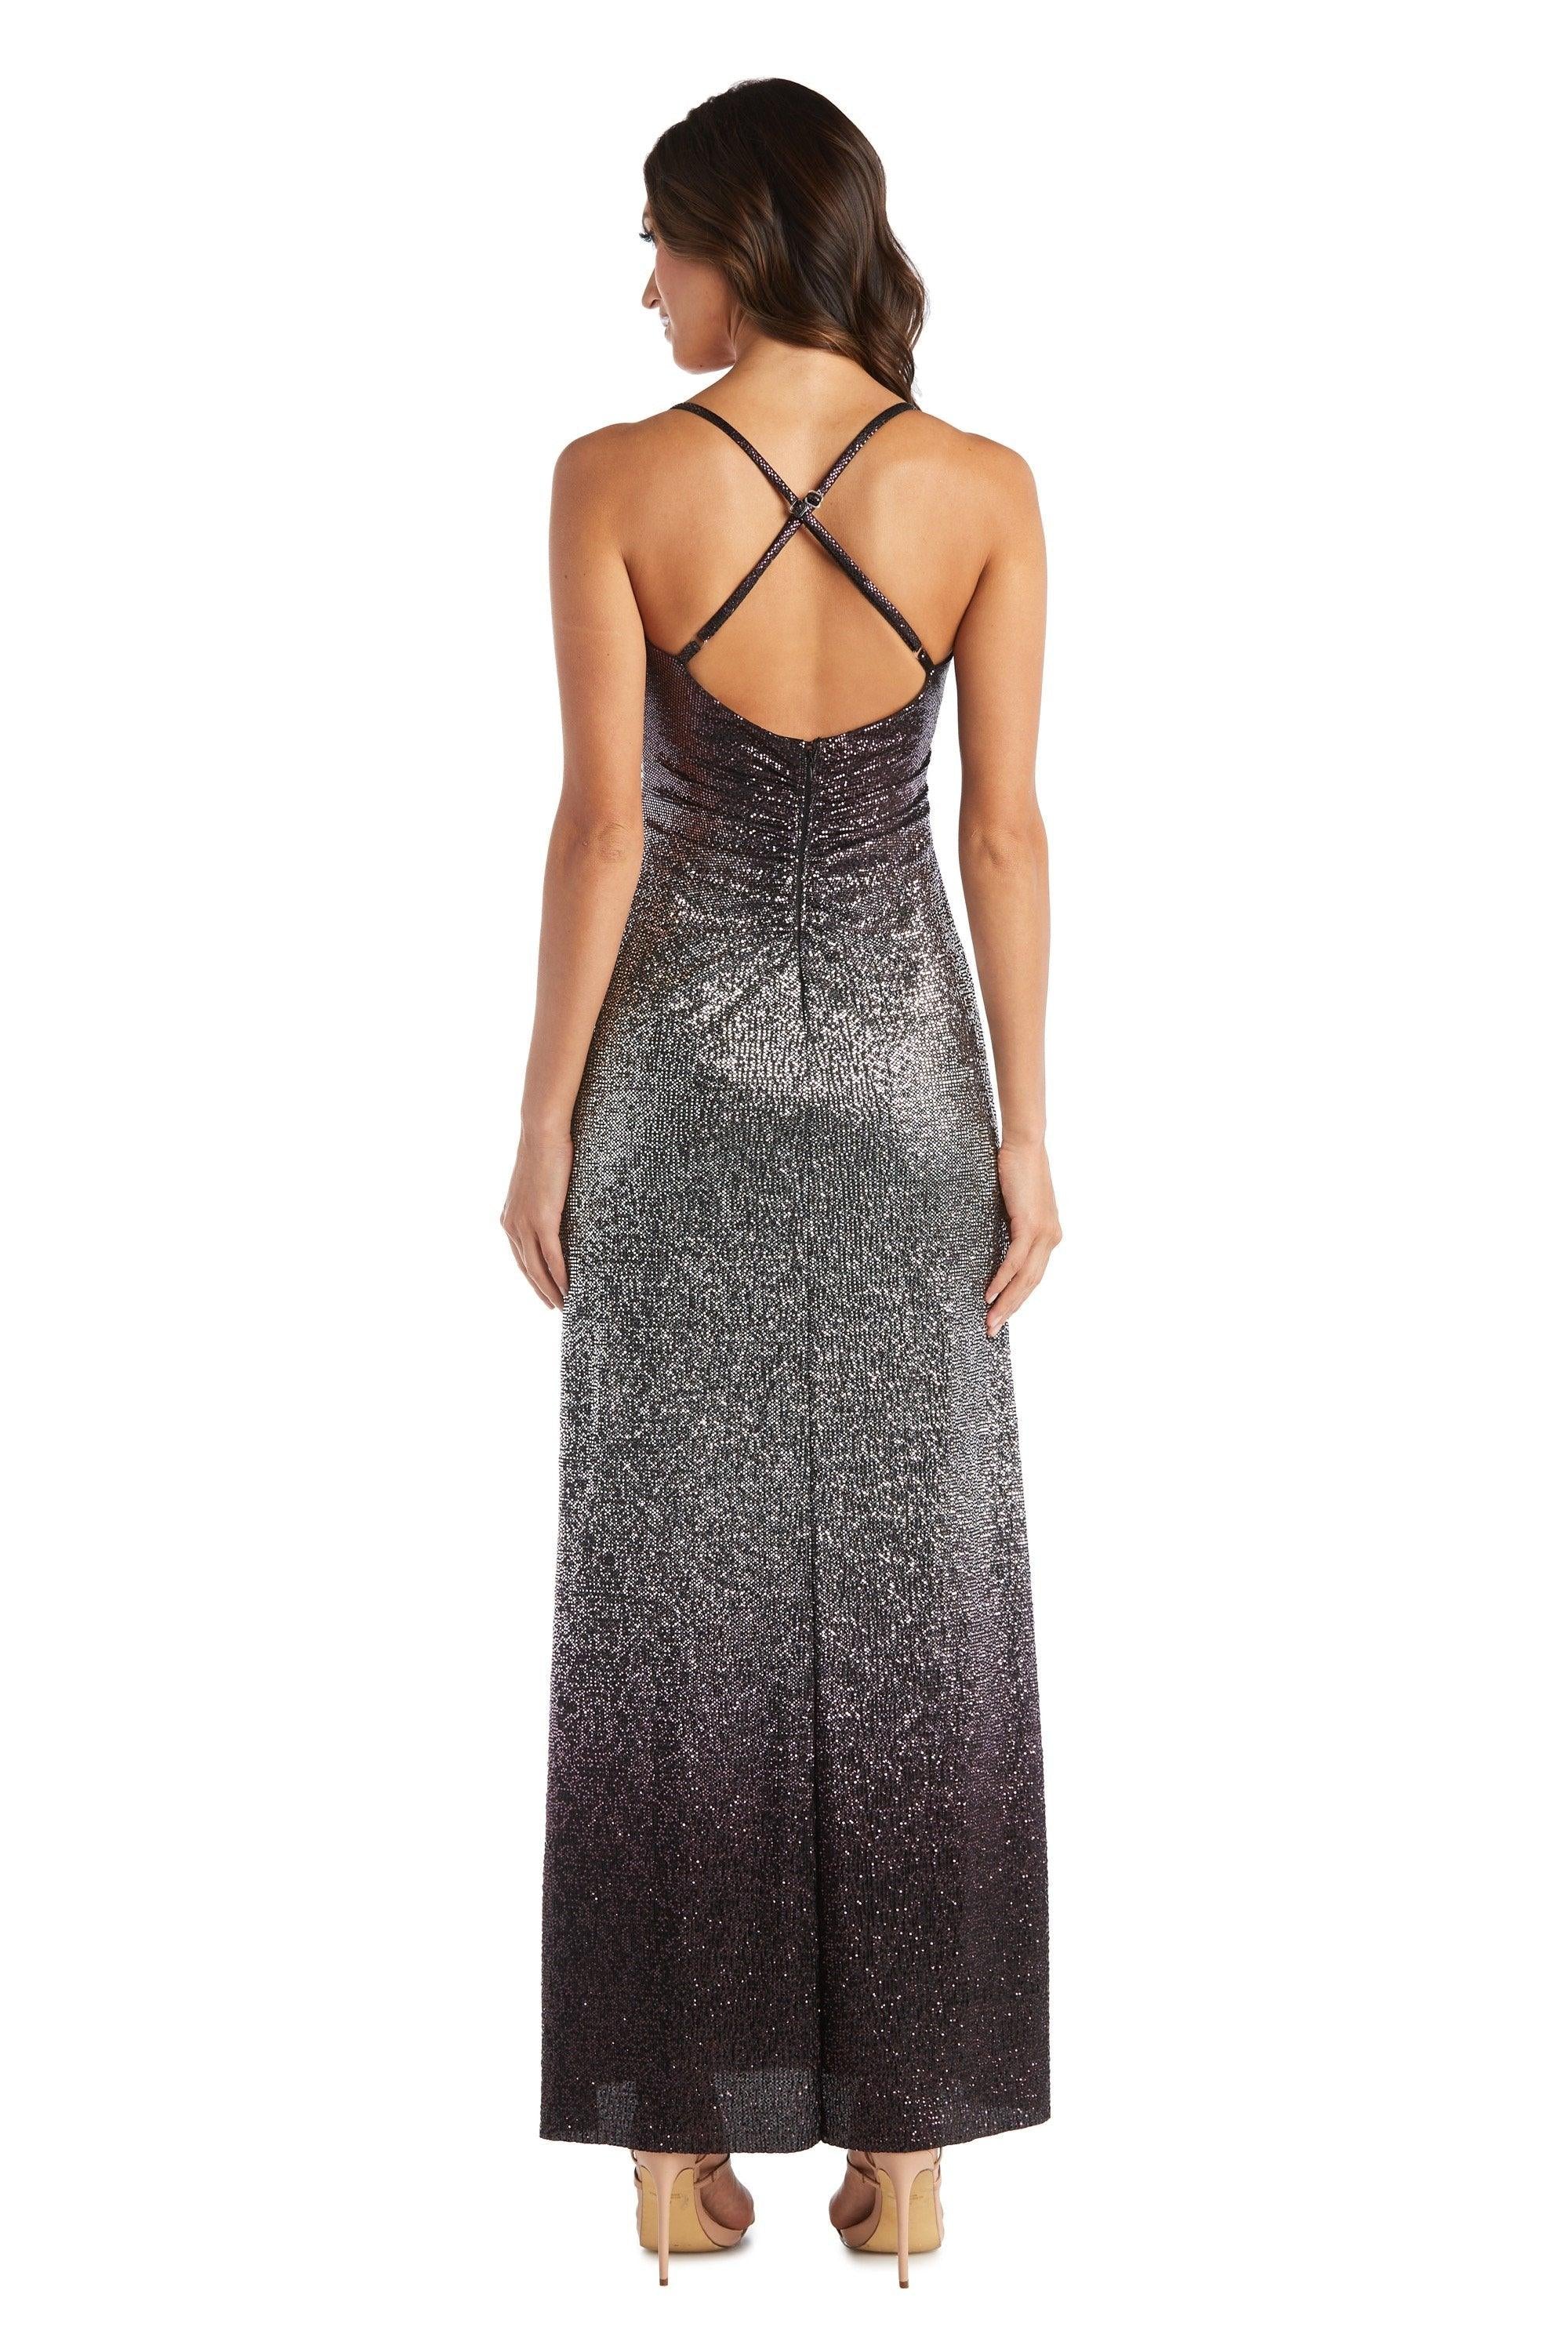 Nightway Long Formal Ombre Dress 21970 - The Dress Outlet